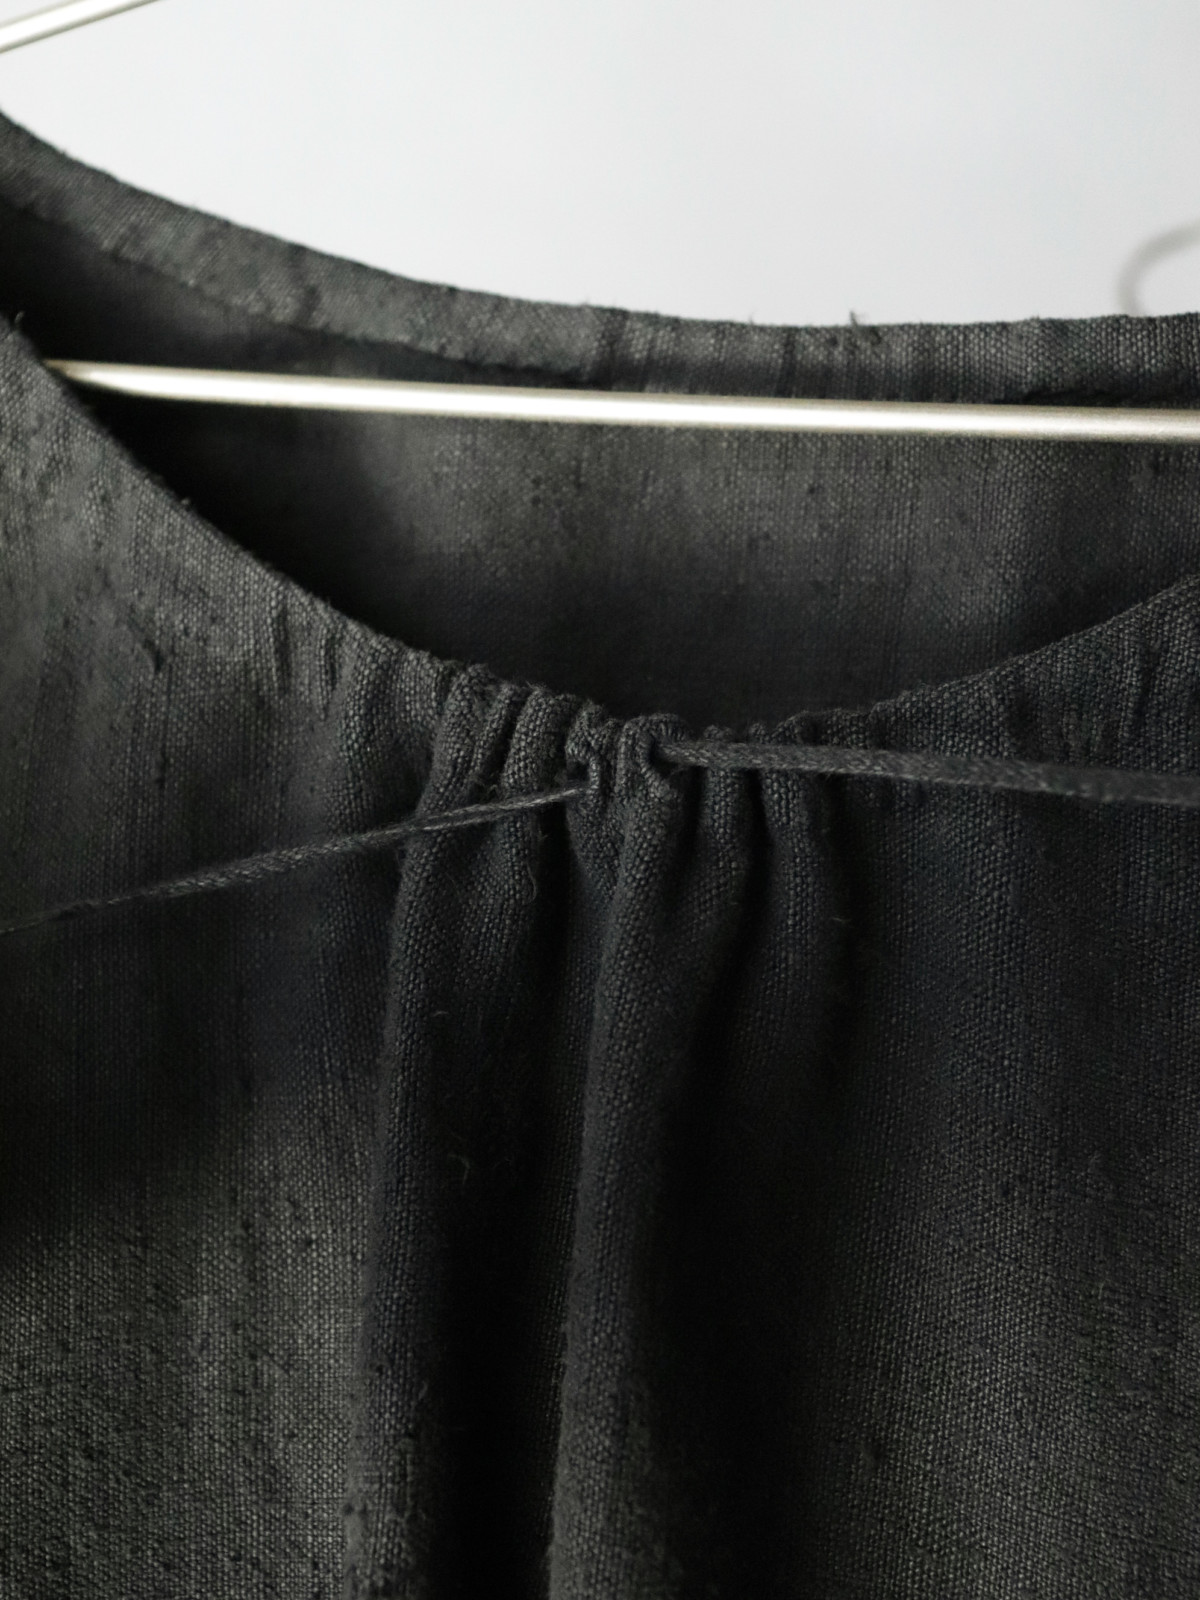 Black-dyed ,one-piece, french linen, drawstring